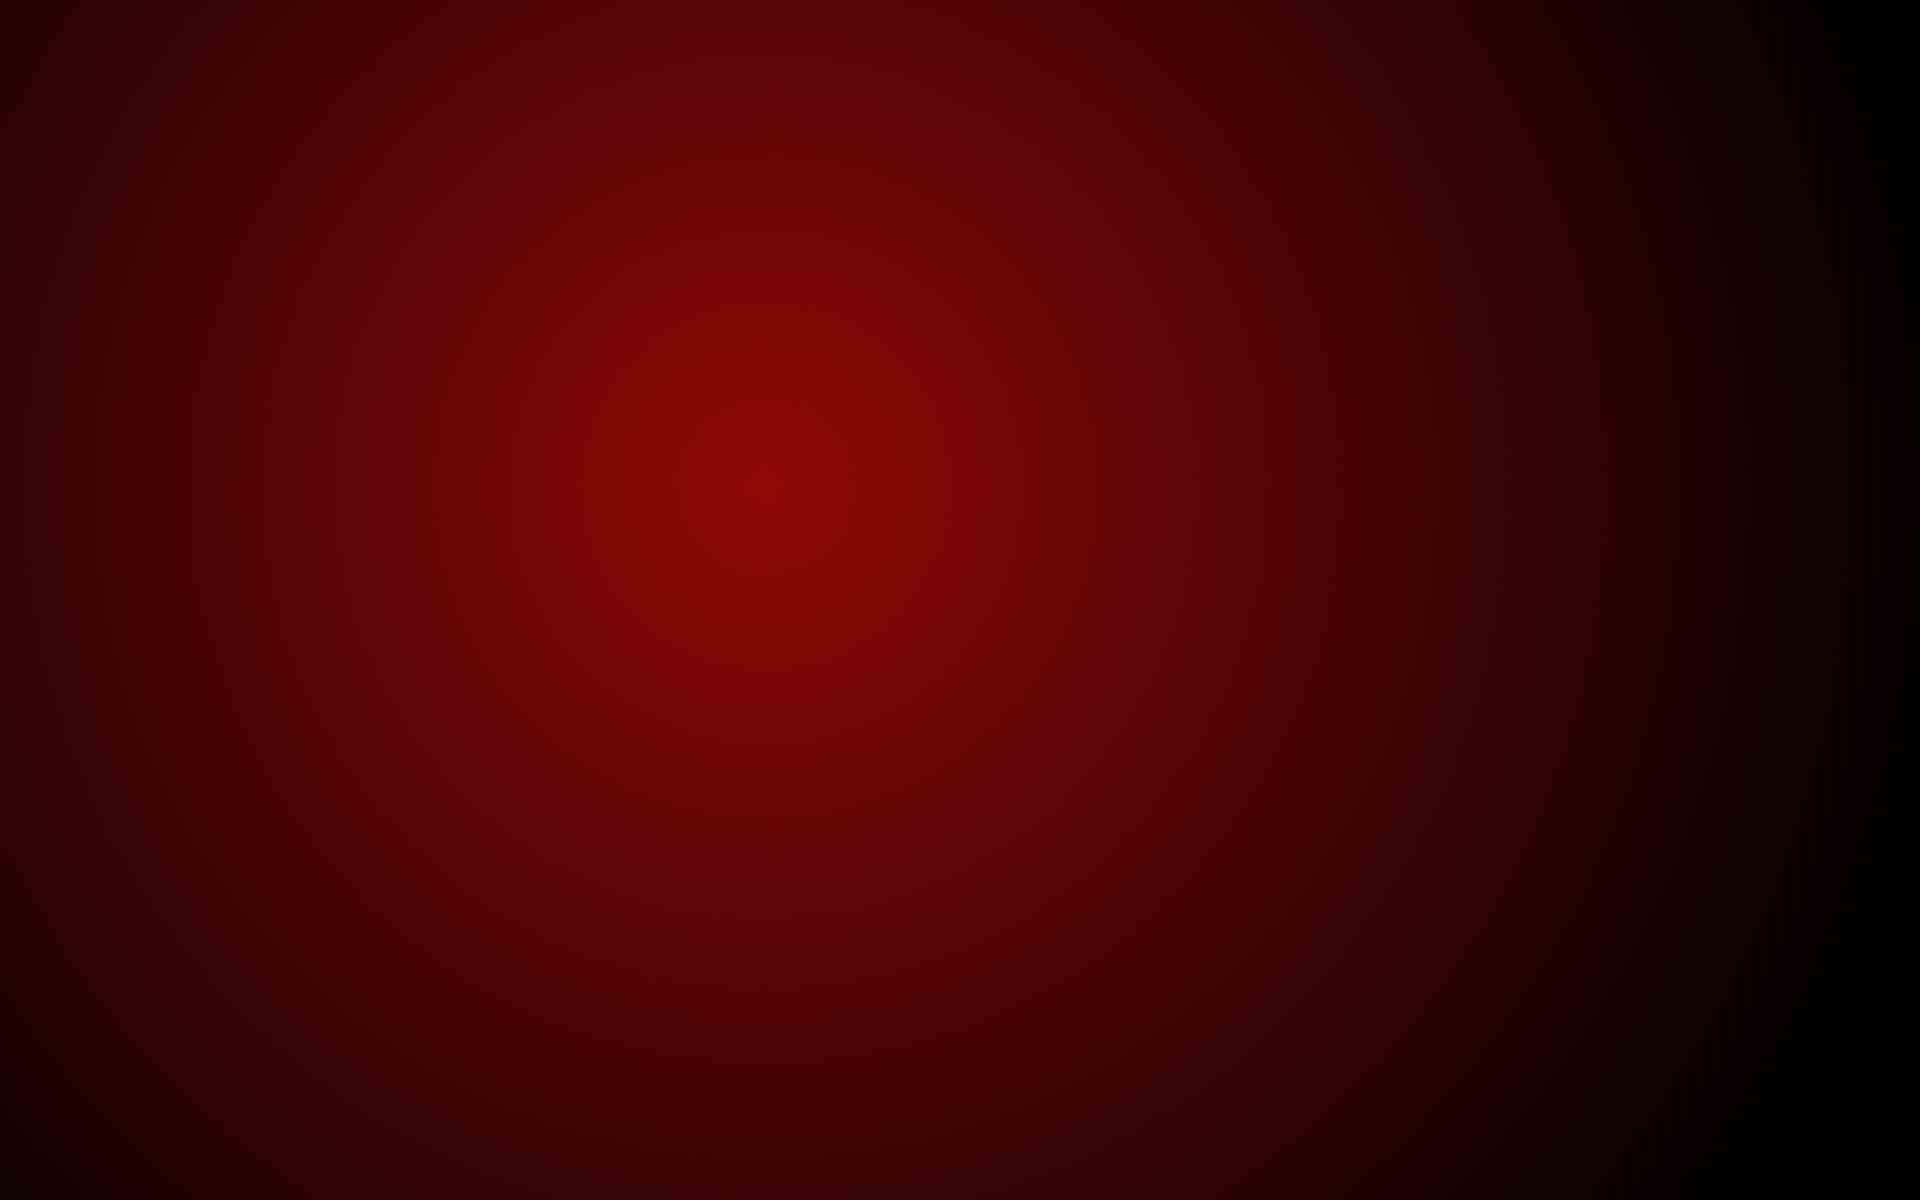 A Red Background With A Black Circle